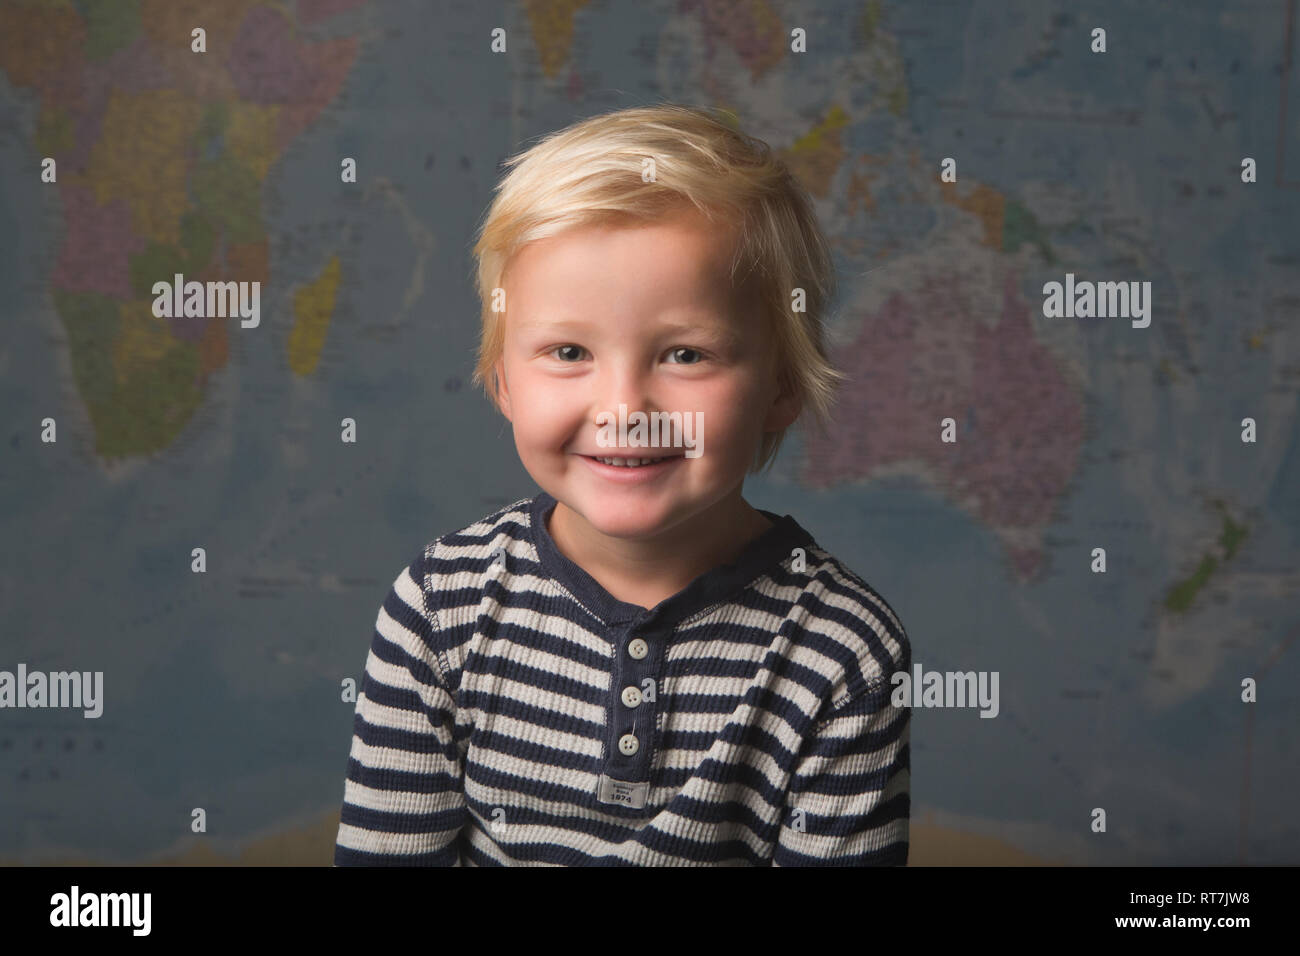 A happy child smiles in front of a world map Stock Photo